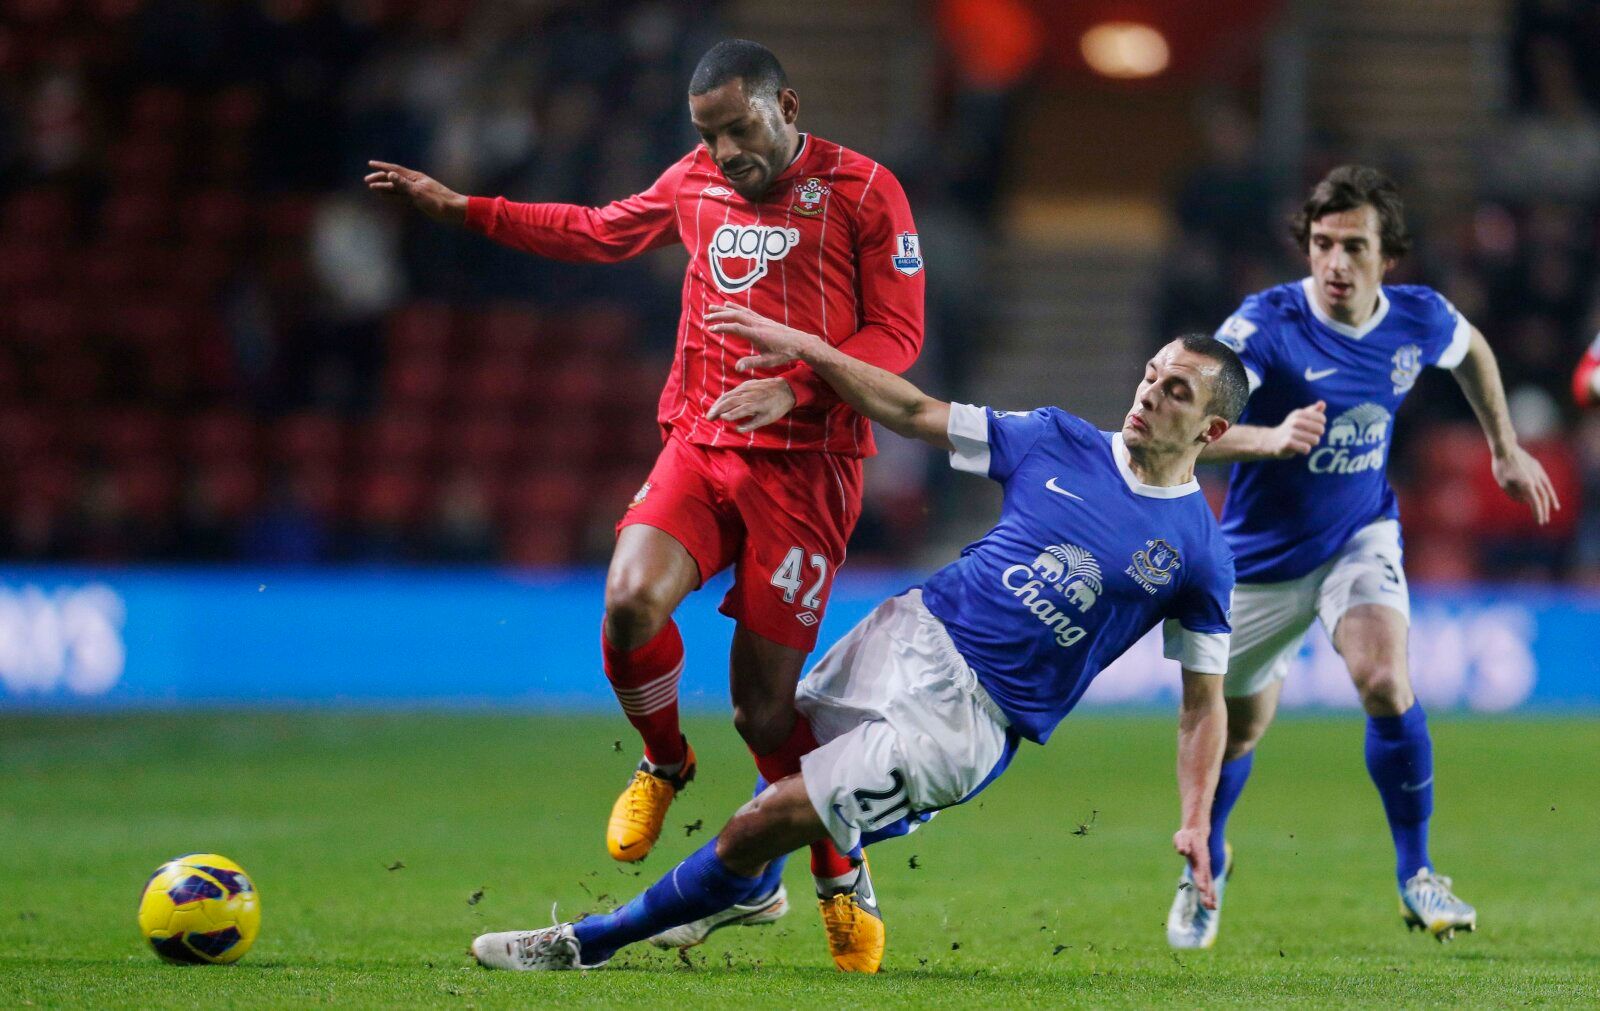 Football - Southampton v Everton - Barclays Premier League  - St Mary's Stadium - 21/1/13 
Southampton's Jason Puncheon (L) and Everton's Leon Osman in action 
Mandatory Credit: Action Images / Andrew Couldridge 
Livepic 
EDITORIAL USE ONLY. No use with unauthorized audio, video, data, fixture lists, club/league logos or live services. Online in-match use limited to 45 images, no video emulation. No use in betting, games or single club/league/player publications.  Please contact your account rep